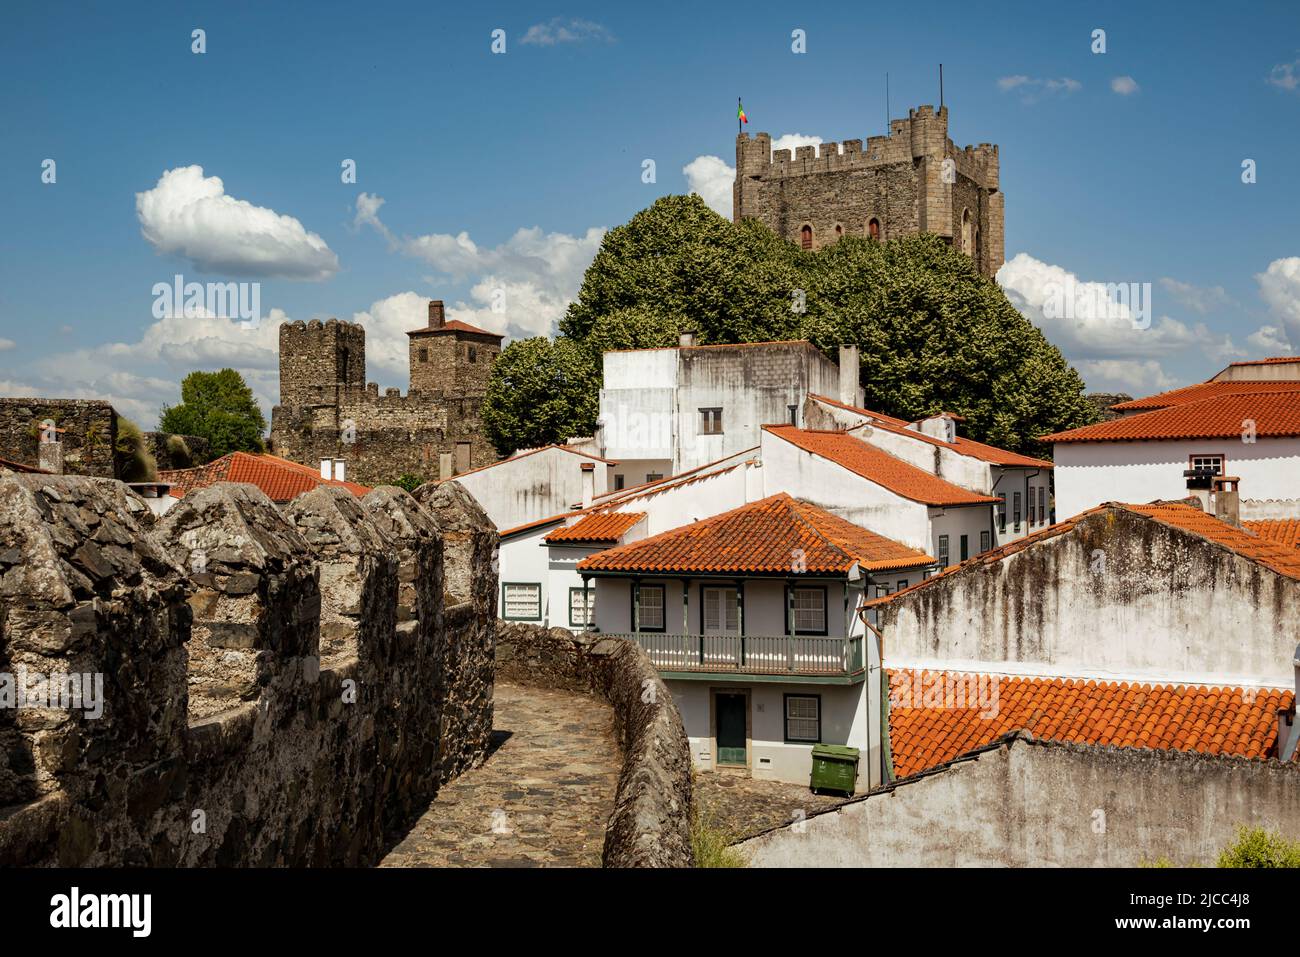 View towards the tower of 'Castelo de Bragança' castle surrounded by white houses with red rooftops, Bragança district, Montesinho, Portugal Stock Photo